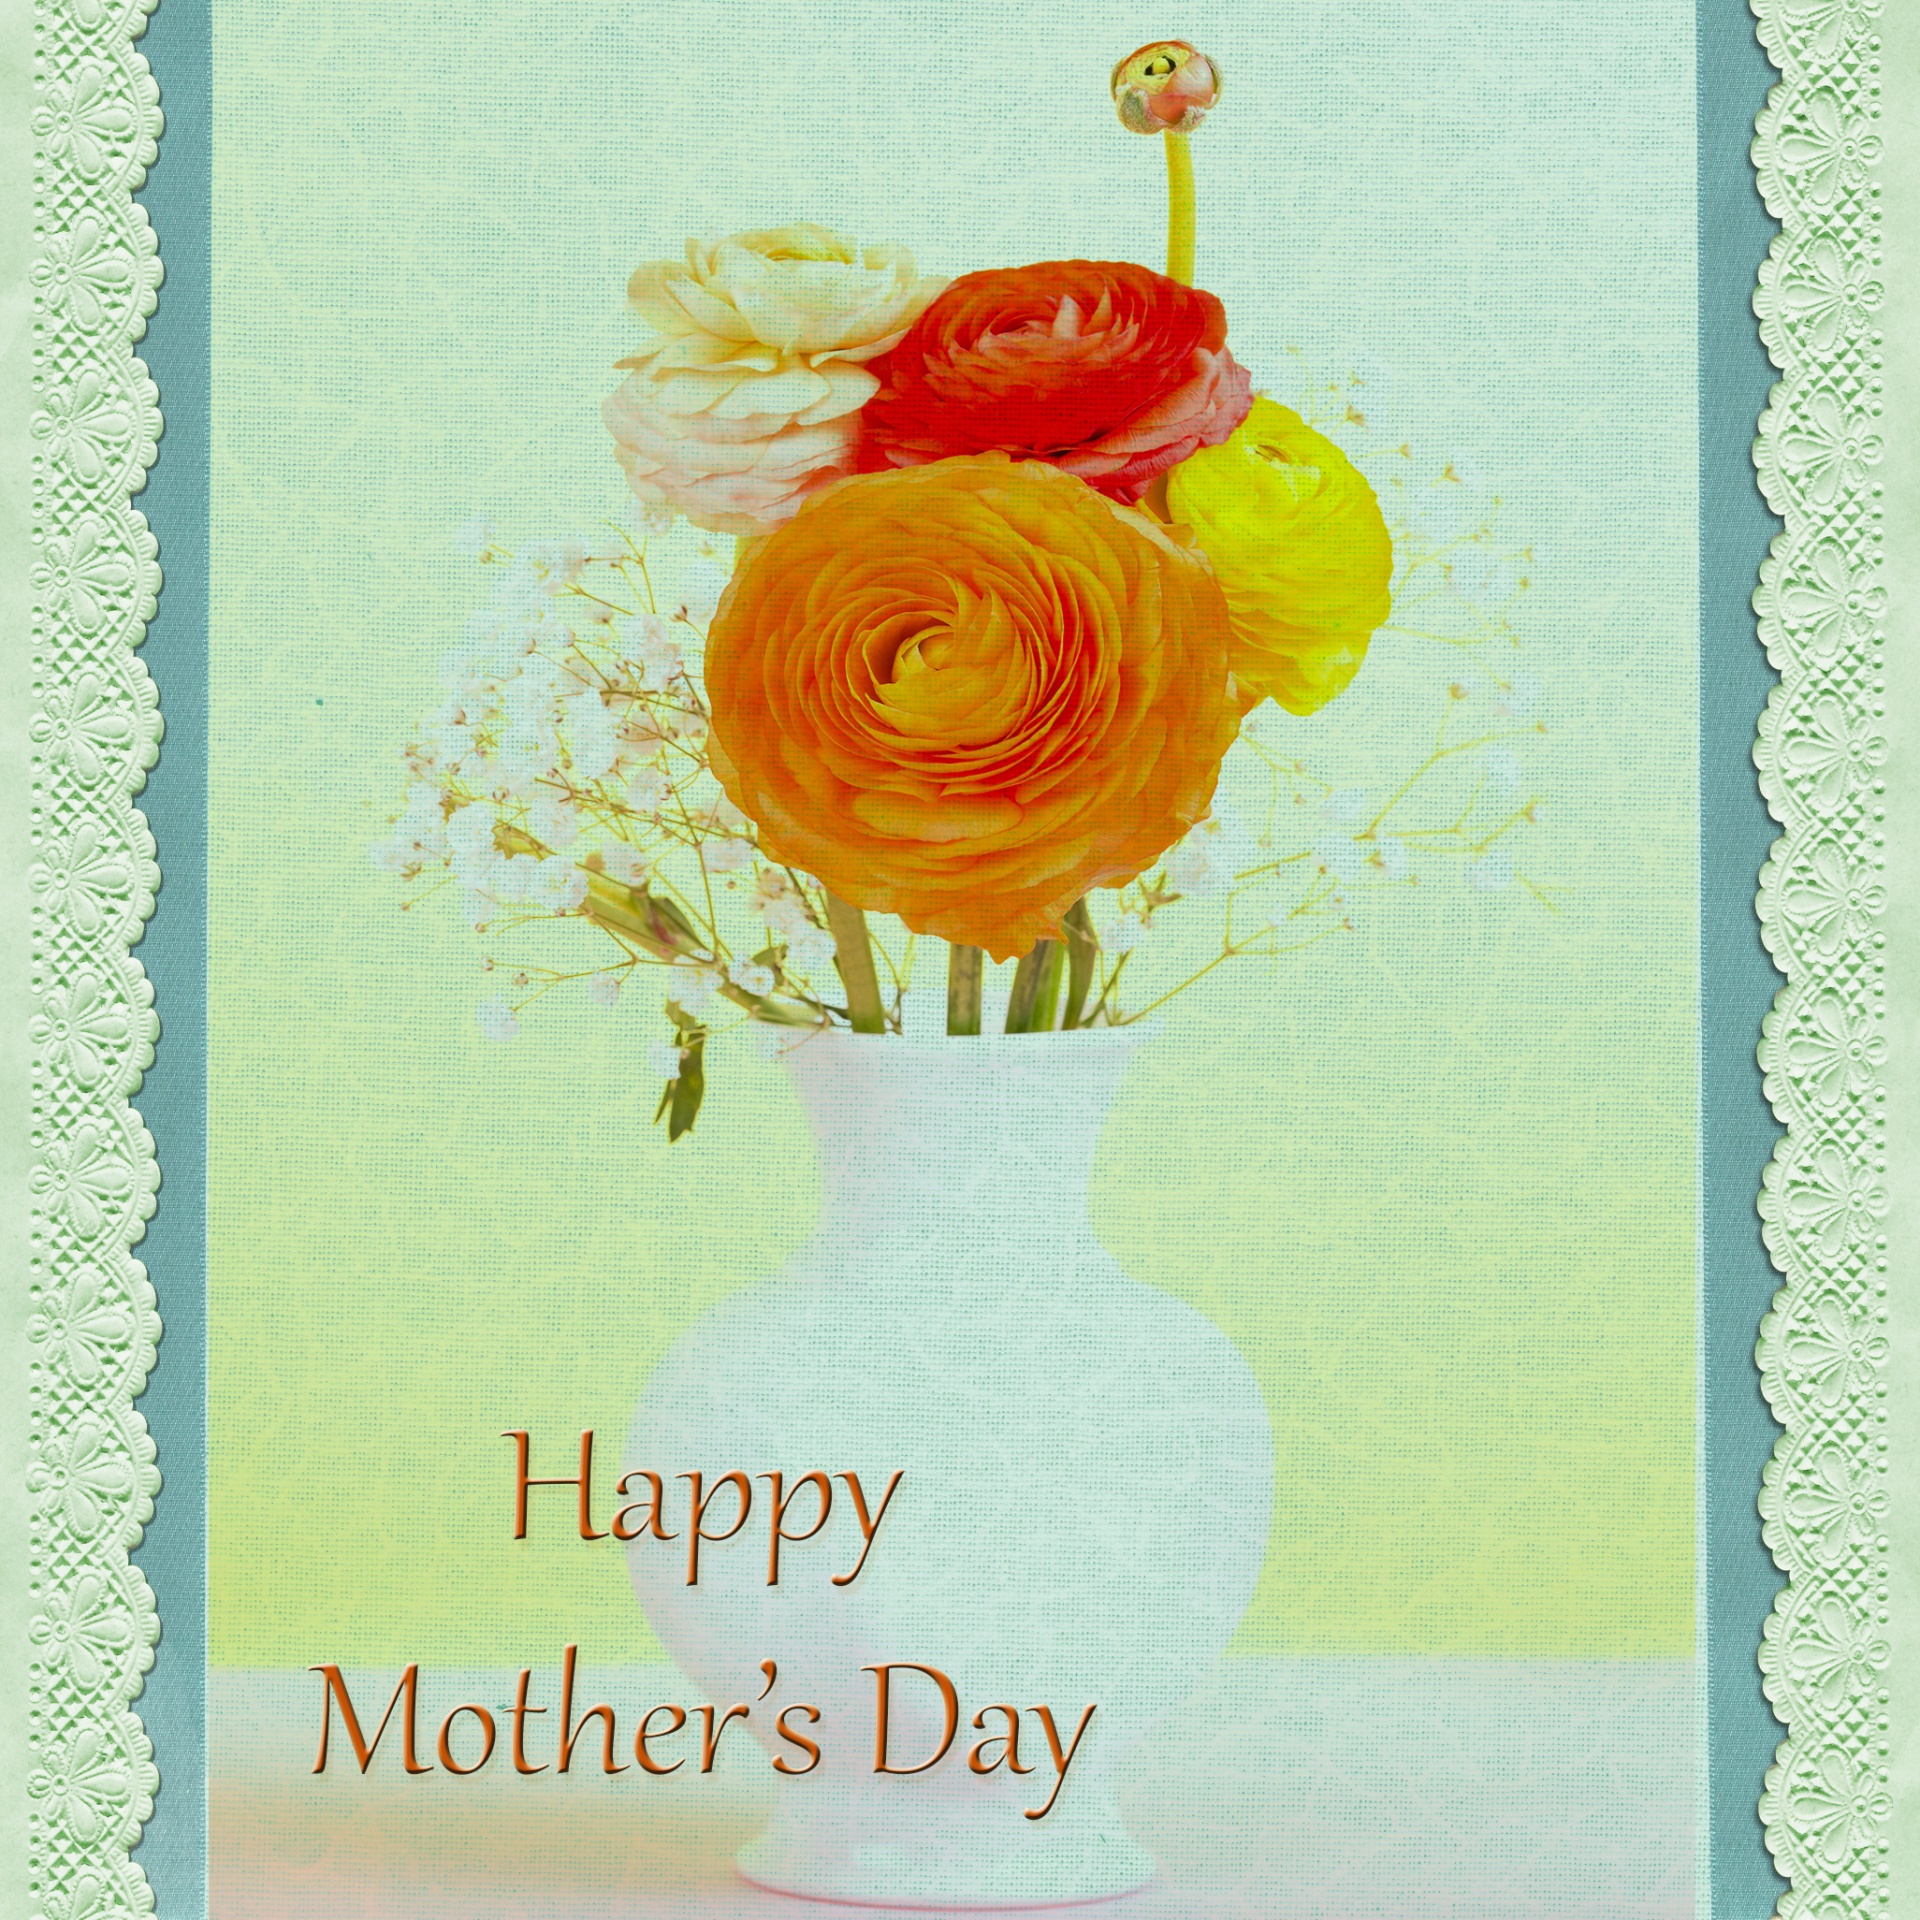 mother's day card mother's day card free photo